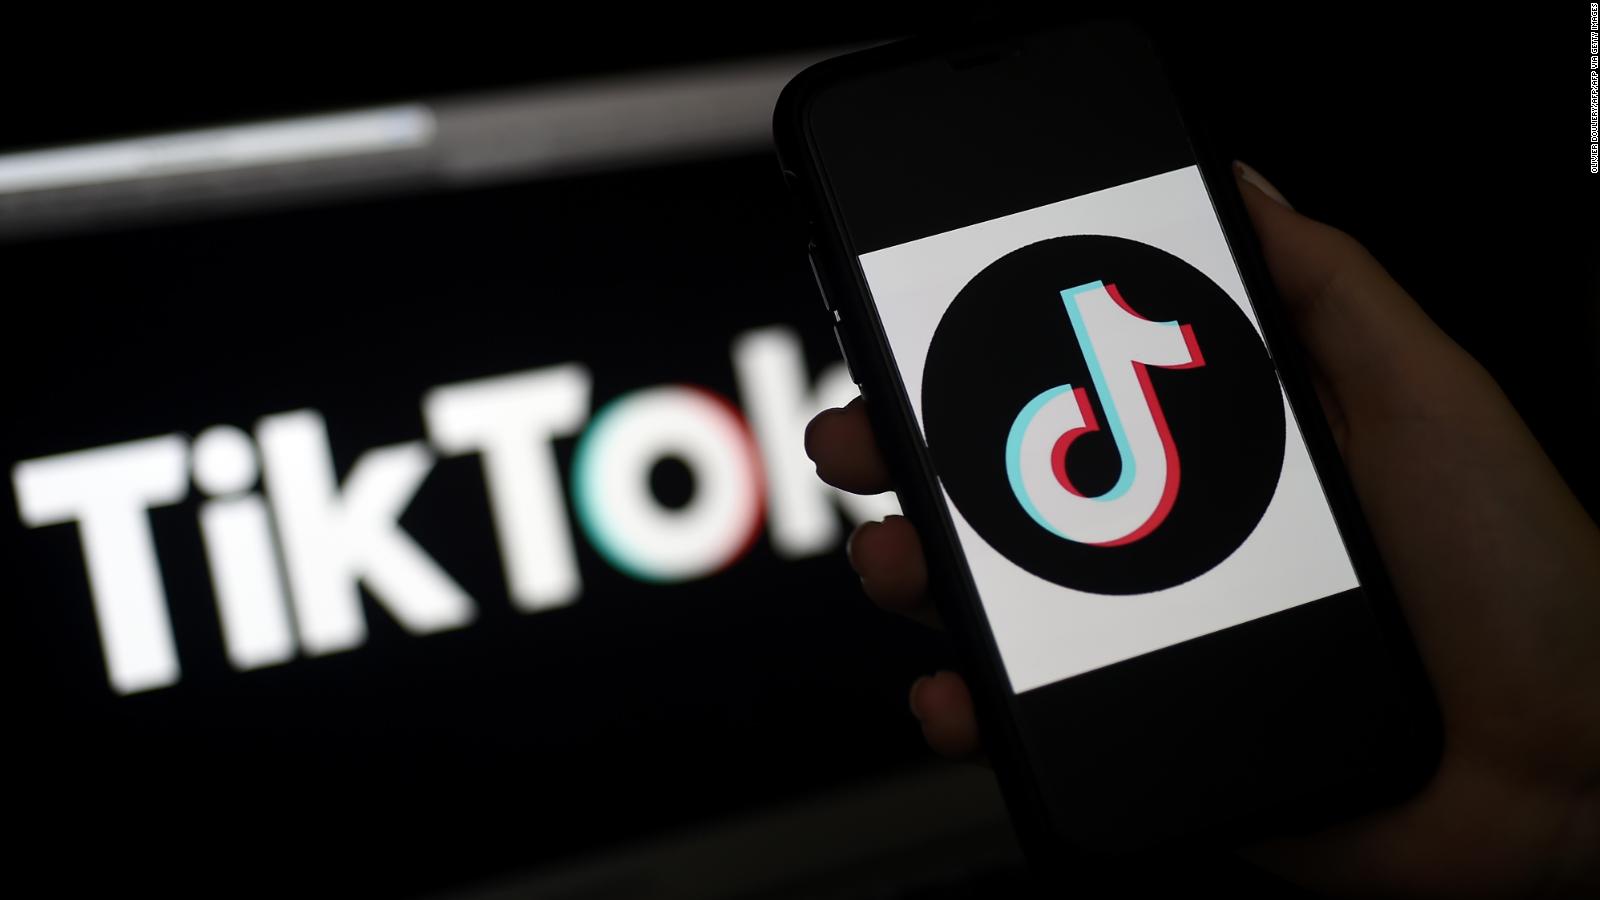 Trump Says He Will Ban Tiktok From Operating In The Us Cnn - 4561 roblox reviews and complaints at pissed consumer